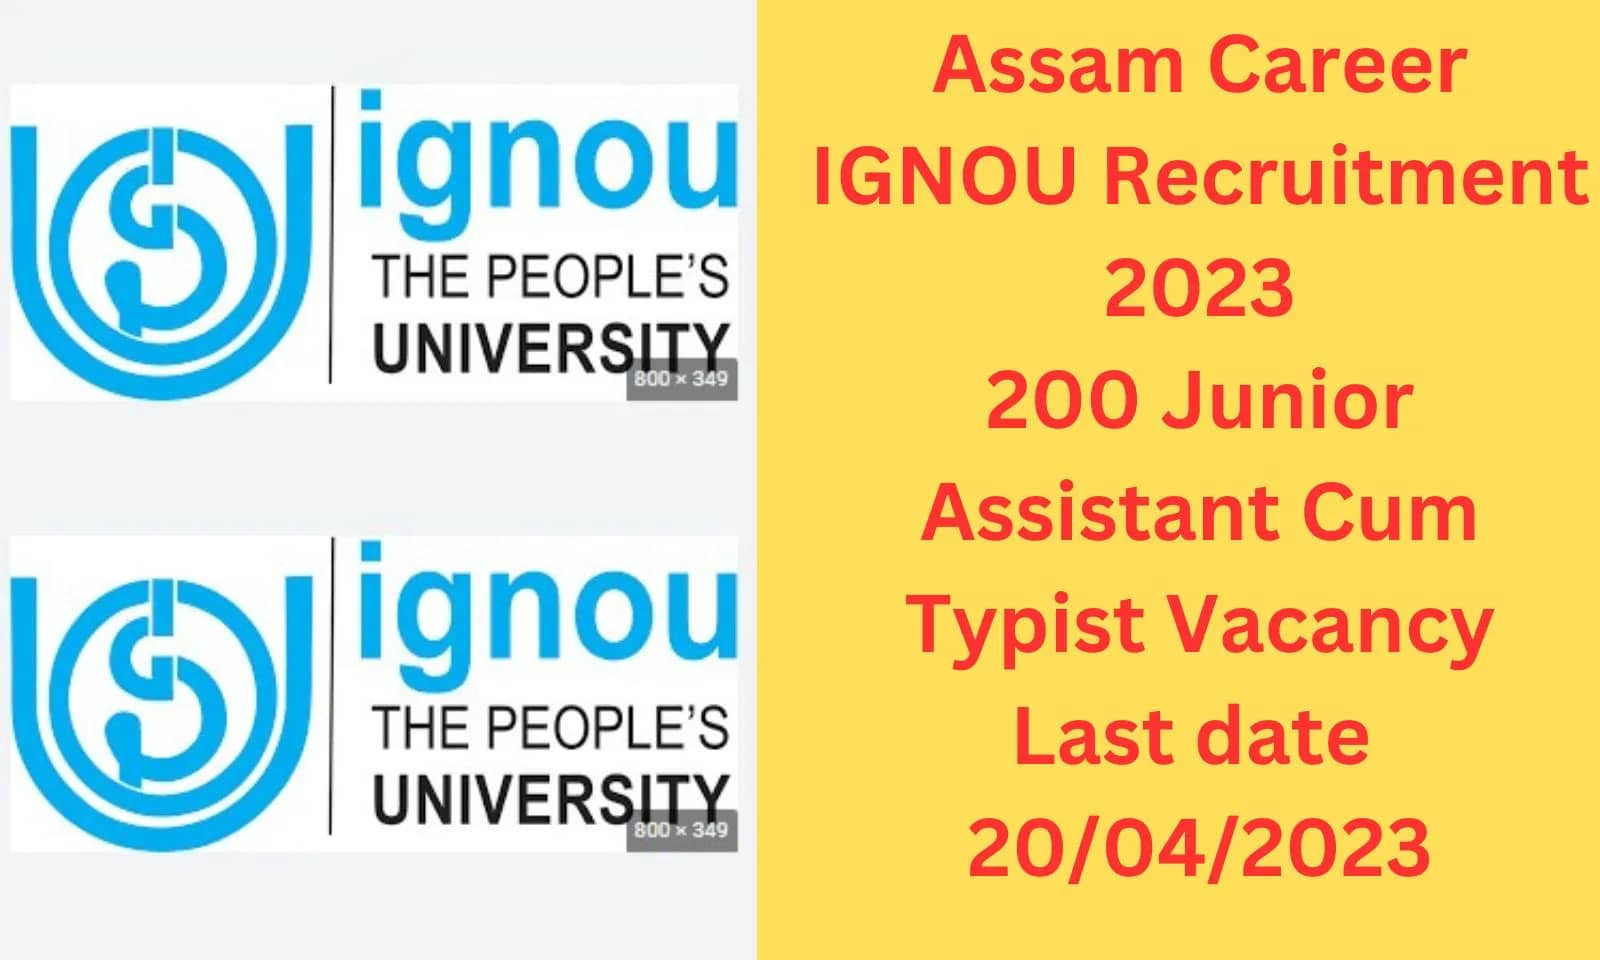 Assam Career IGNOU Recruitment 2023|200 Junior Assistant Cum Typist Vacancy :: The dream of getting a job in IGNOU came true, recruitment on these posts?